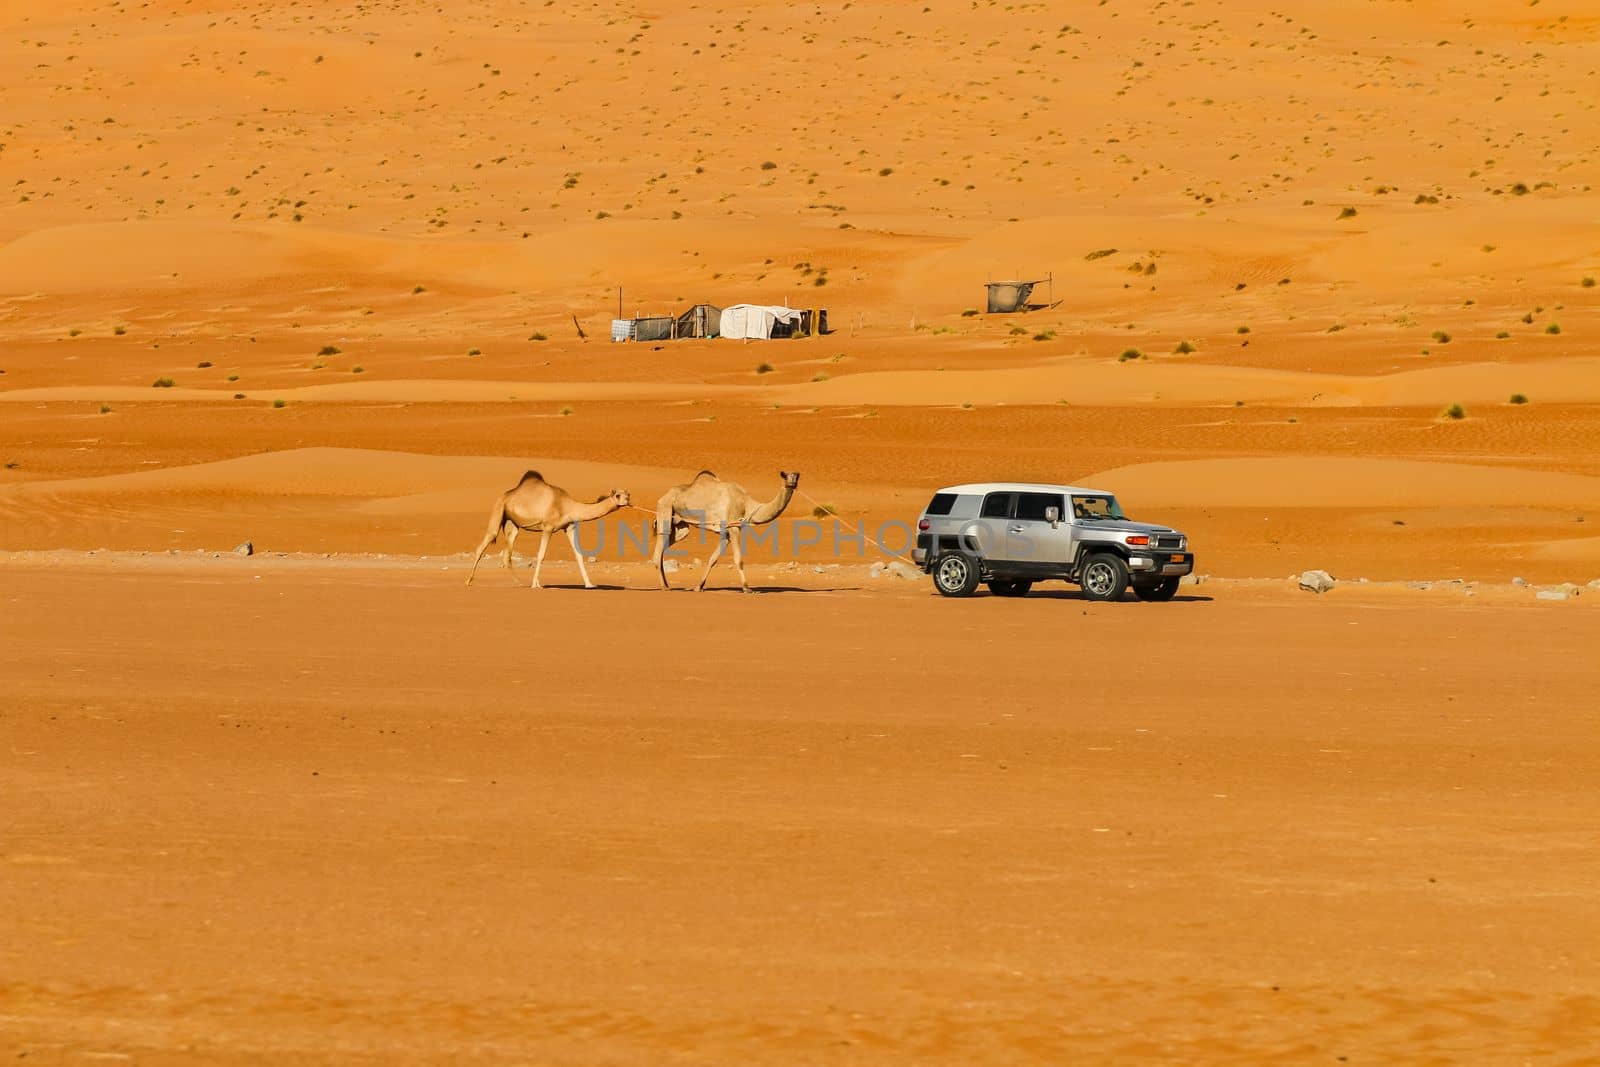 Two camels walk tied behind an off-road vehicle, Wahiba Sands desert, Oman by astrosoft